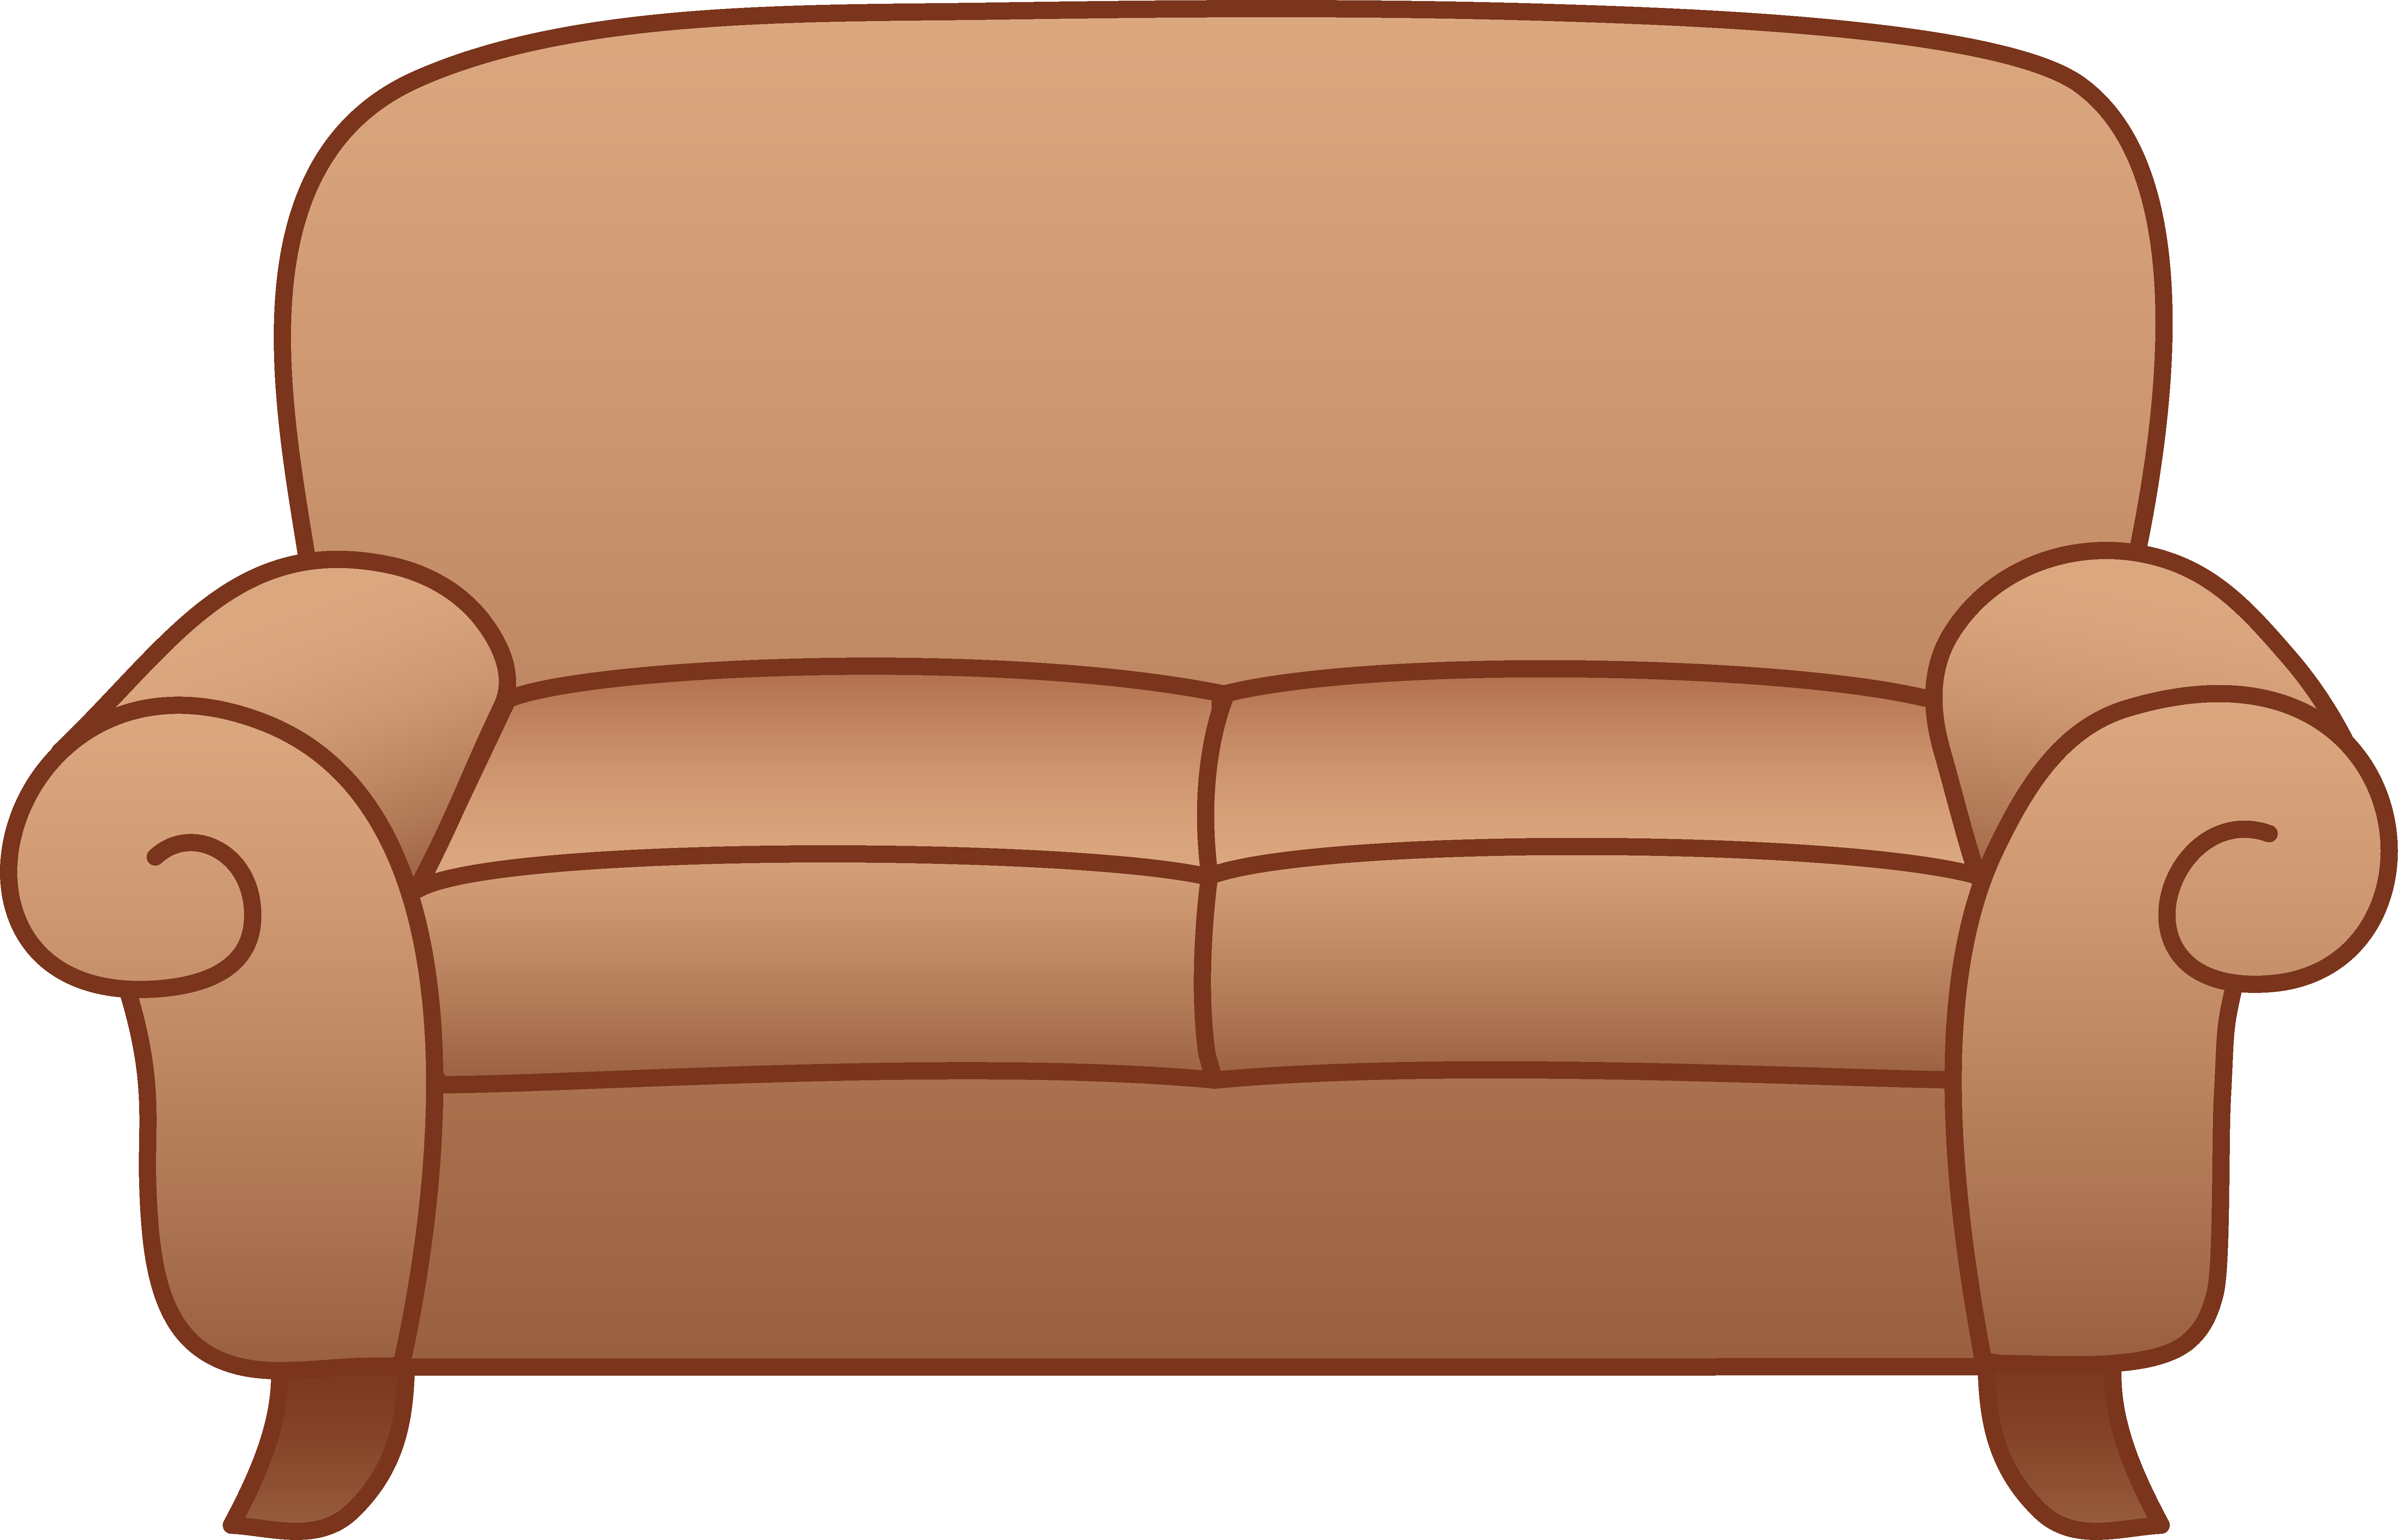 furniture clipart free download - photo #36